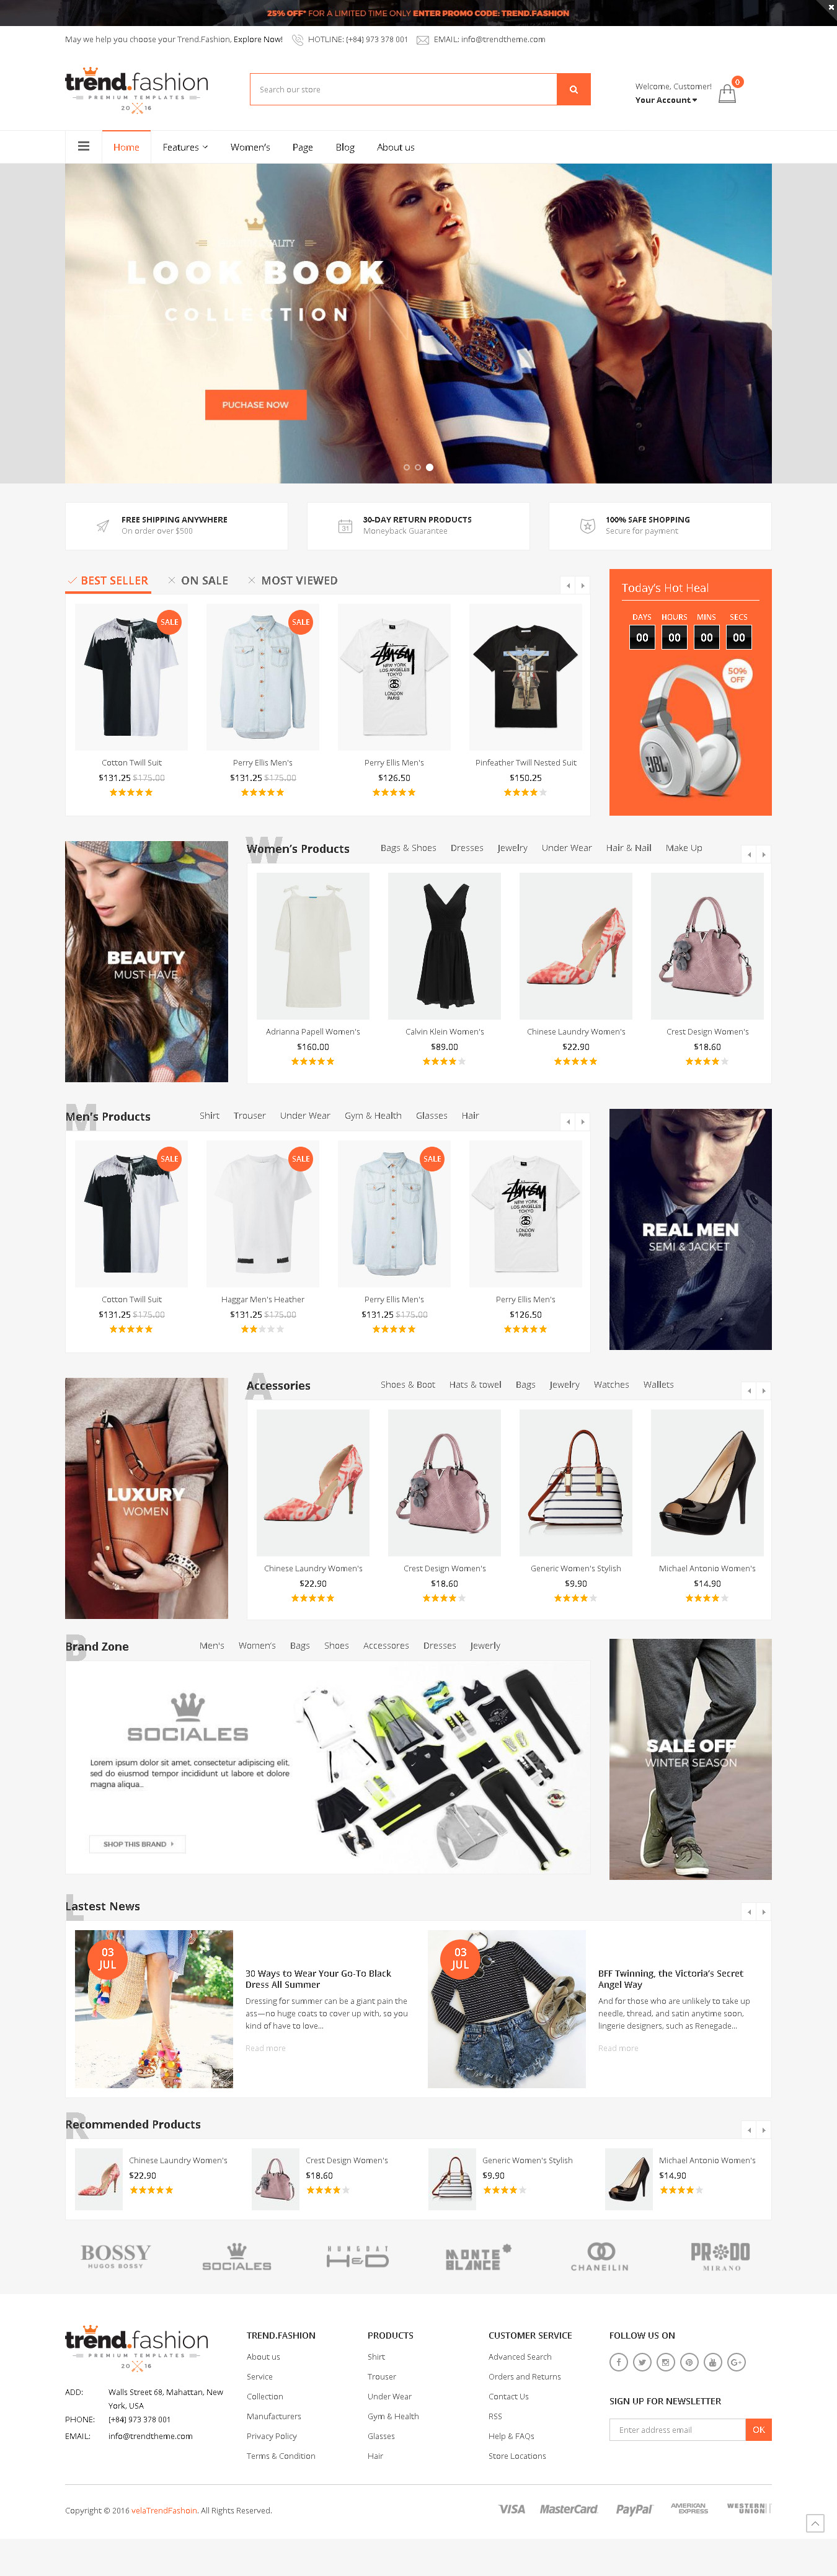 Top Shopify Theme For Large Inventory Fashion Store - TrendFashion - Multipurpose Responsive Shopify theme